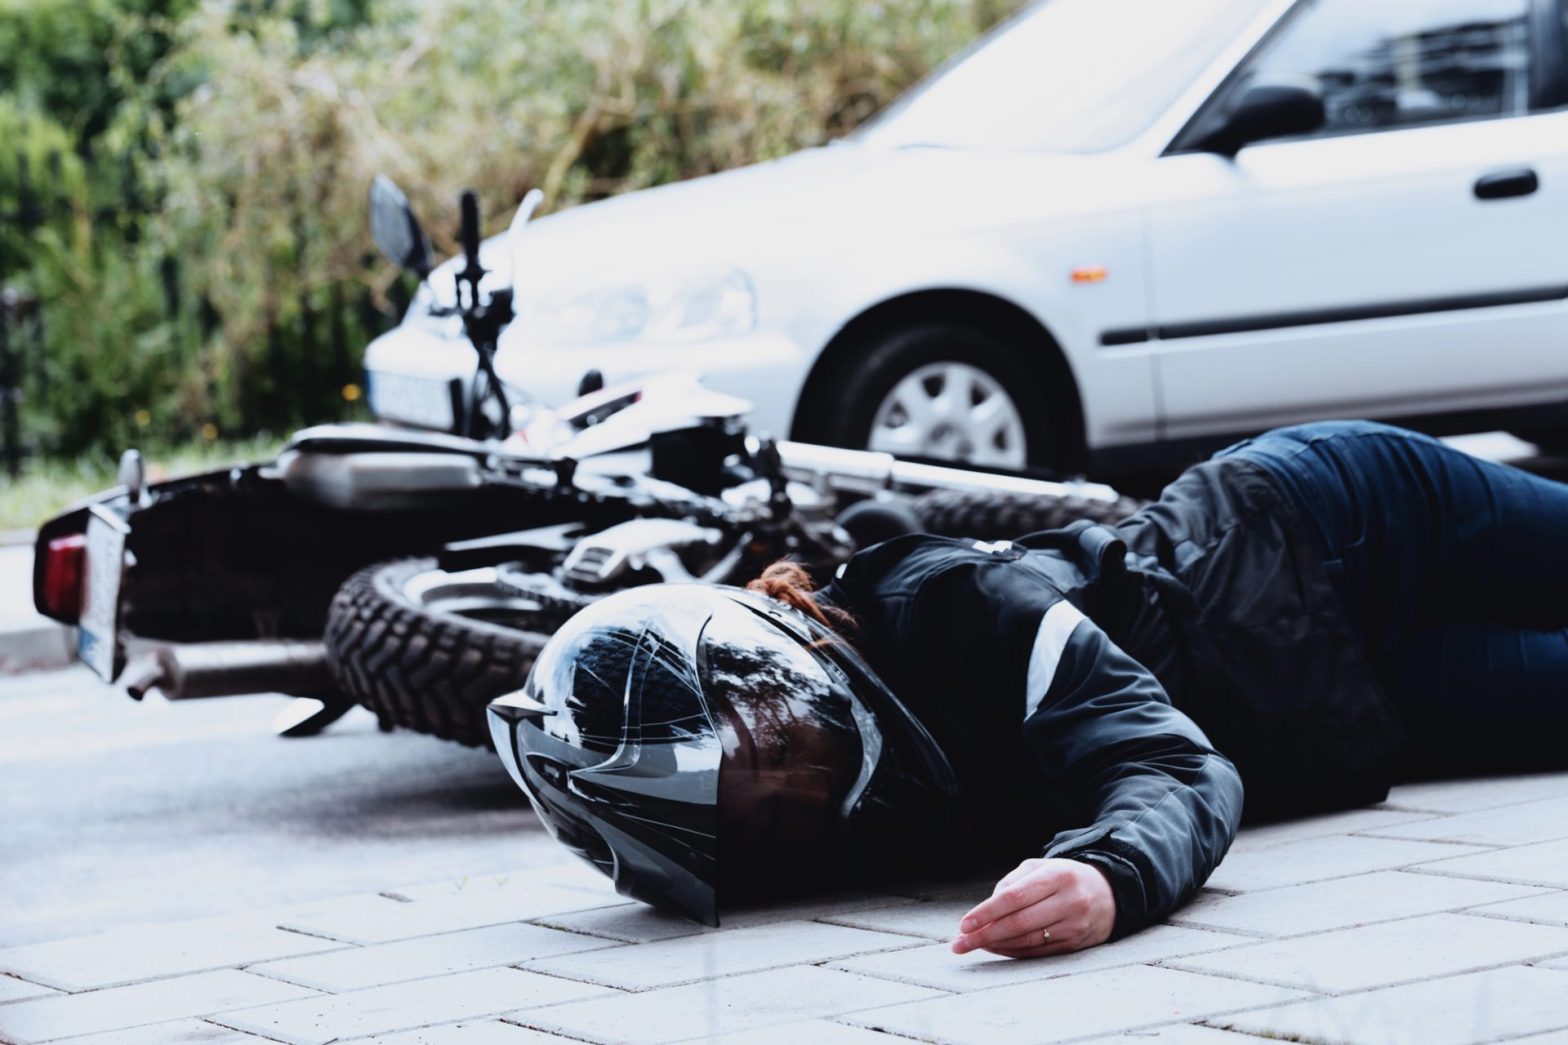 Motorcycle Accident Claim